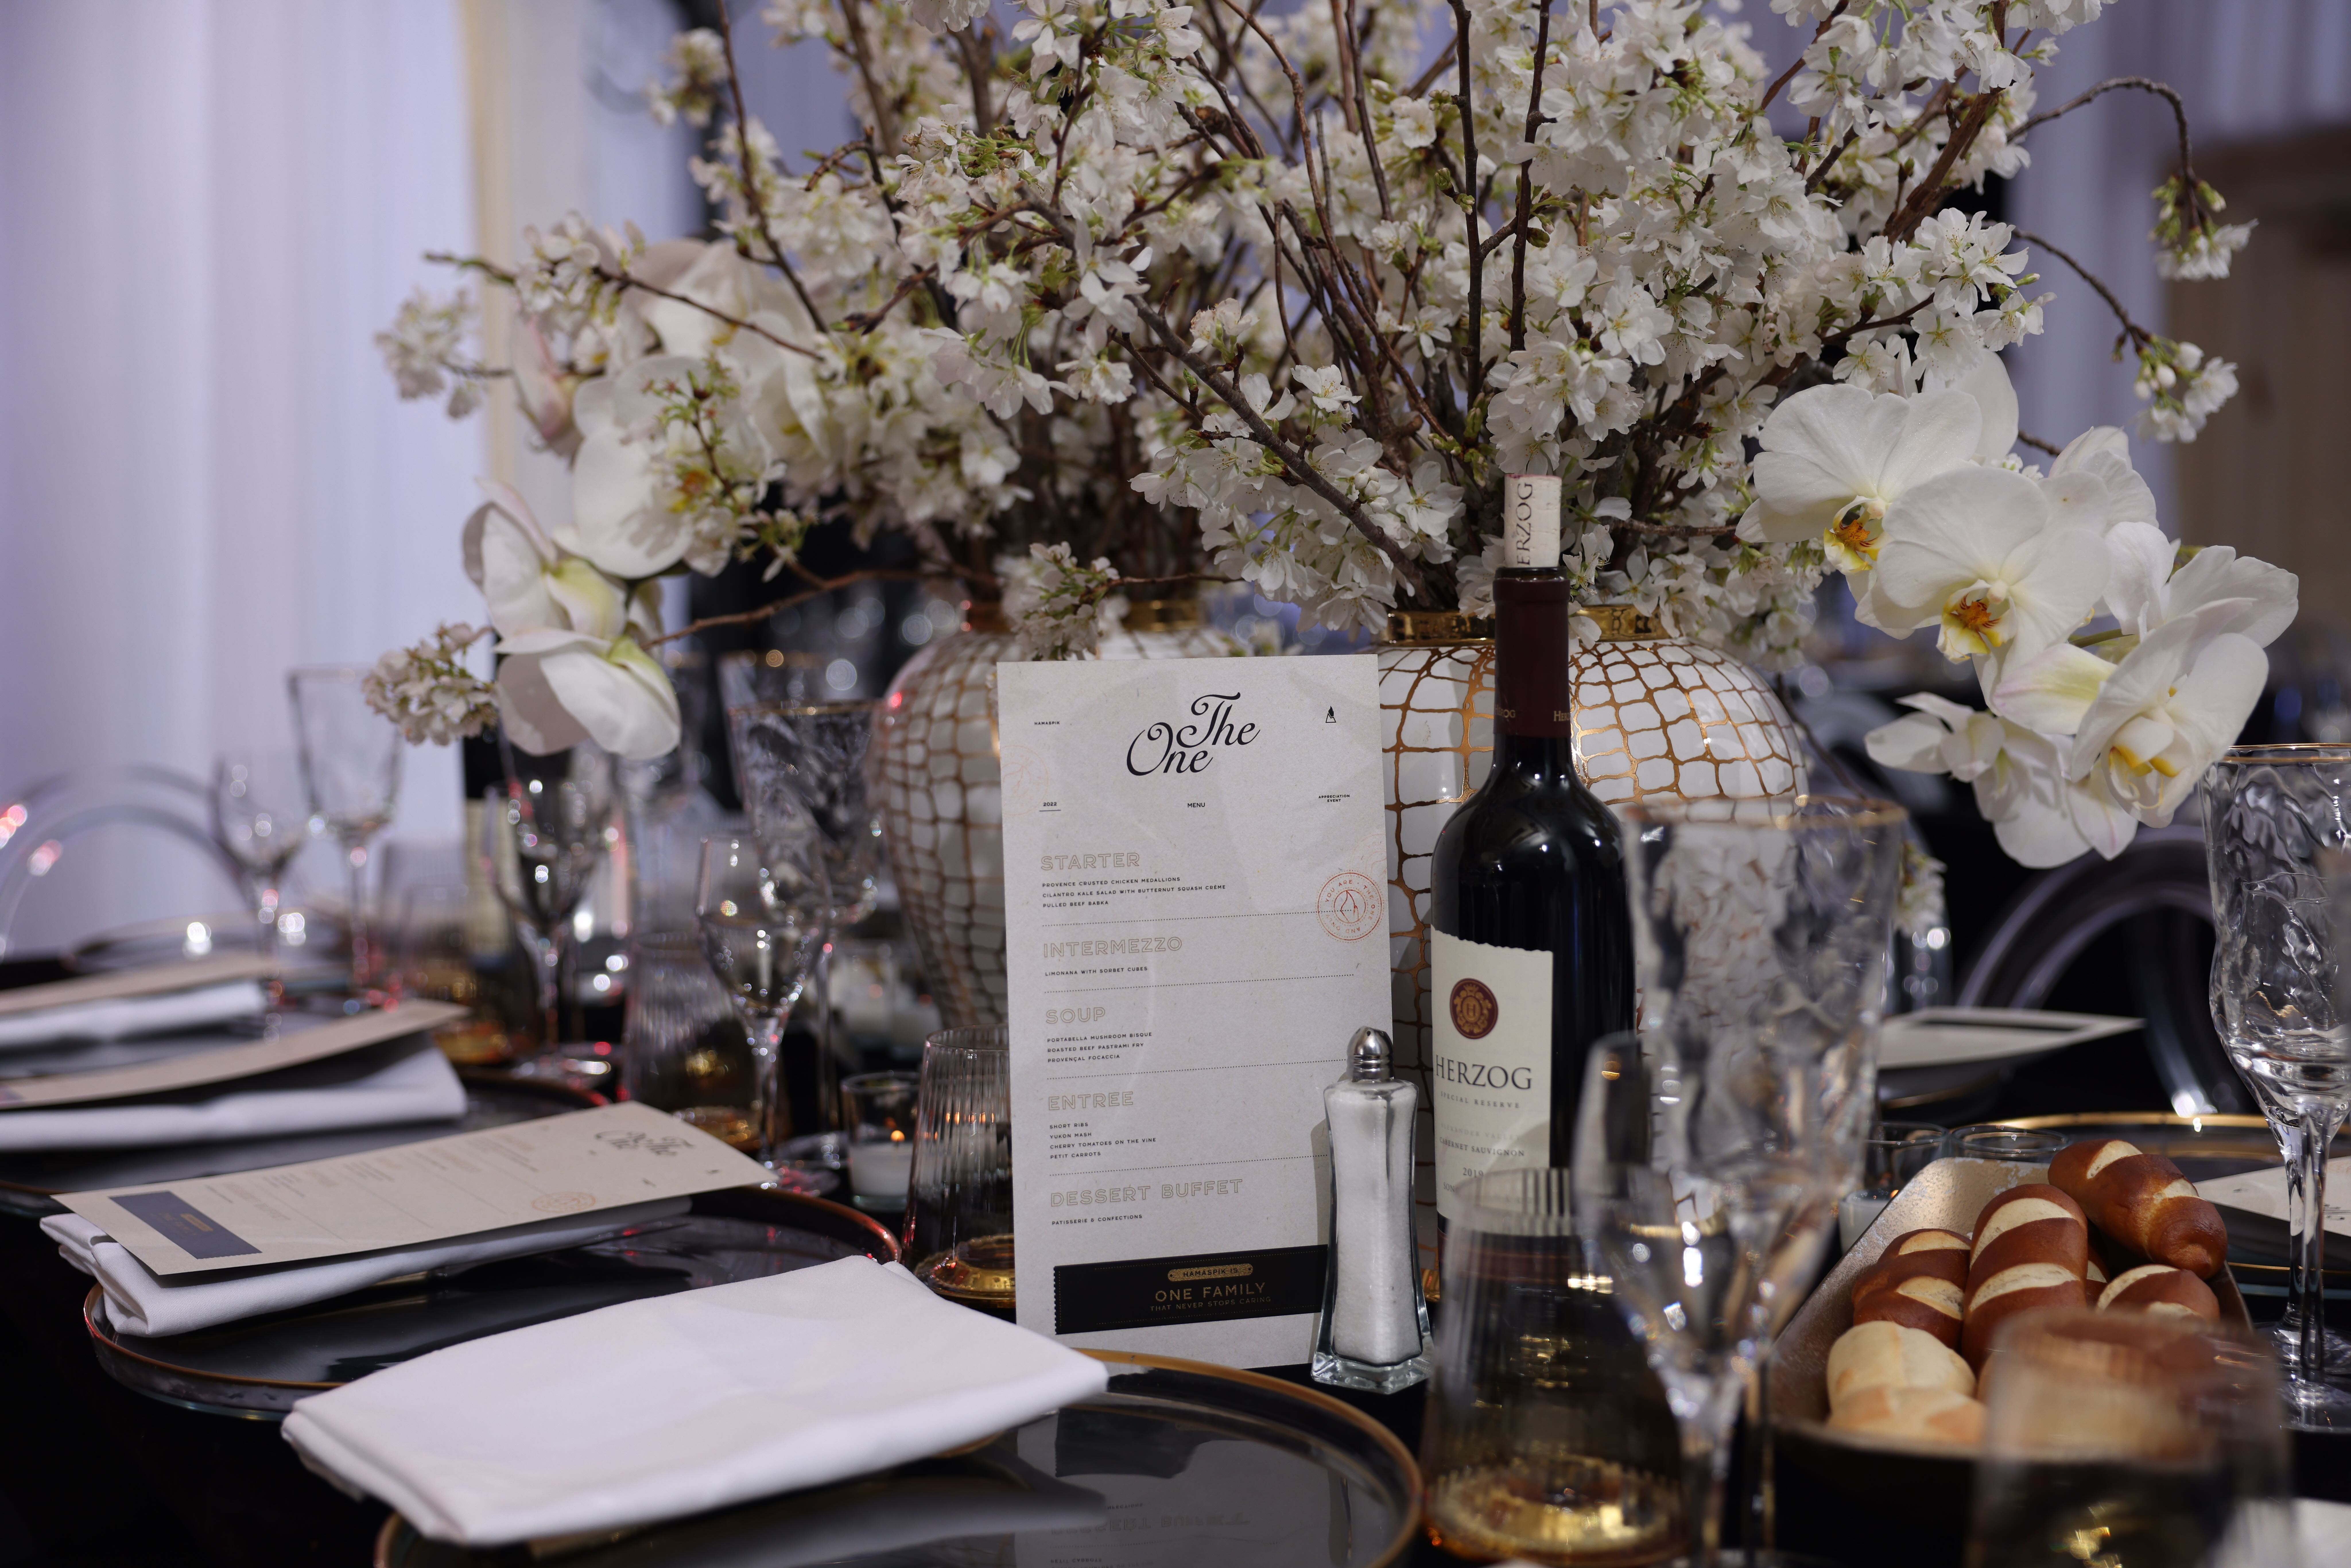 Herzog wine bottle, with a menu of the day in Ateres Avrohom for The One Event by Hamaspik